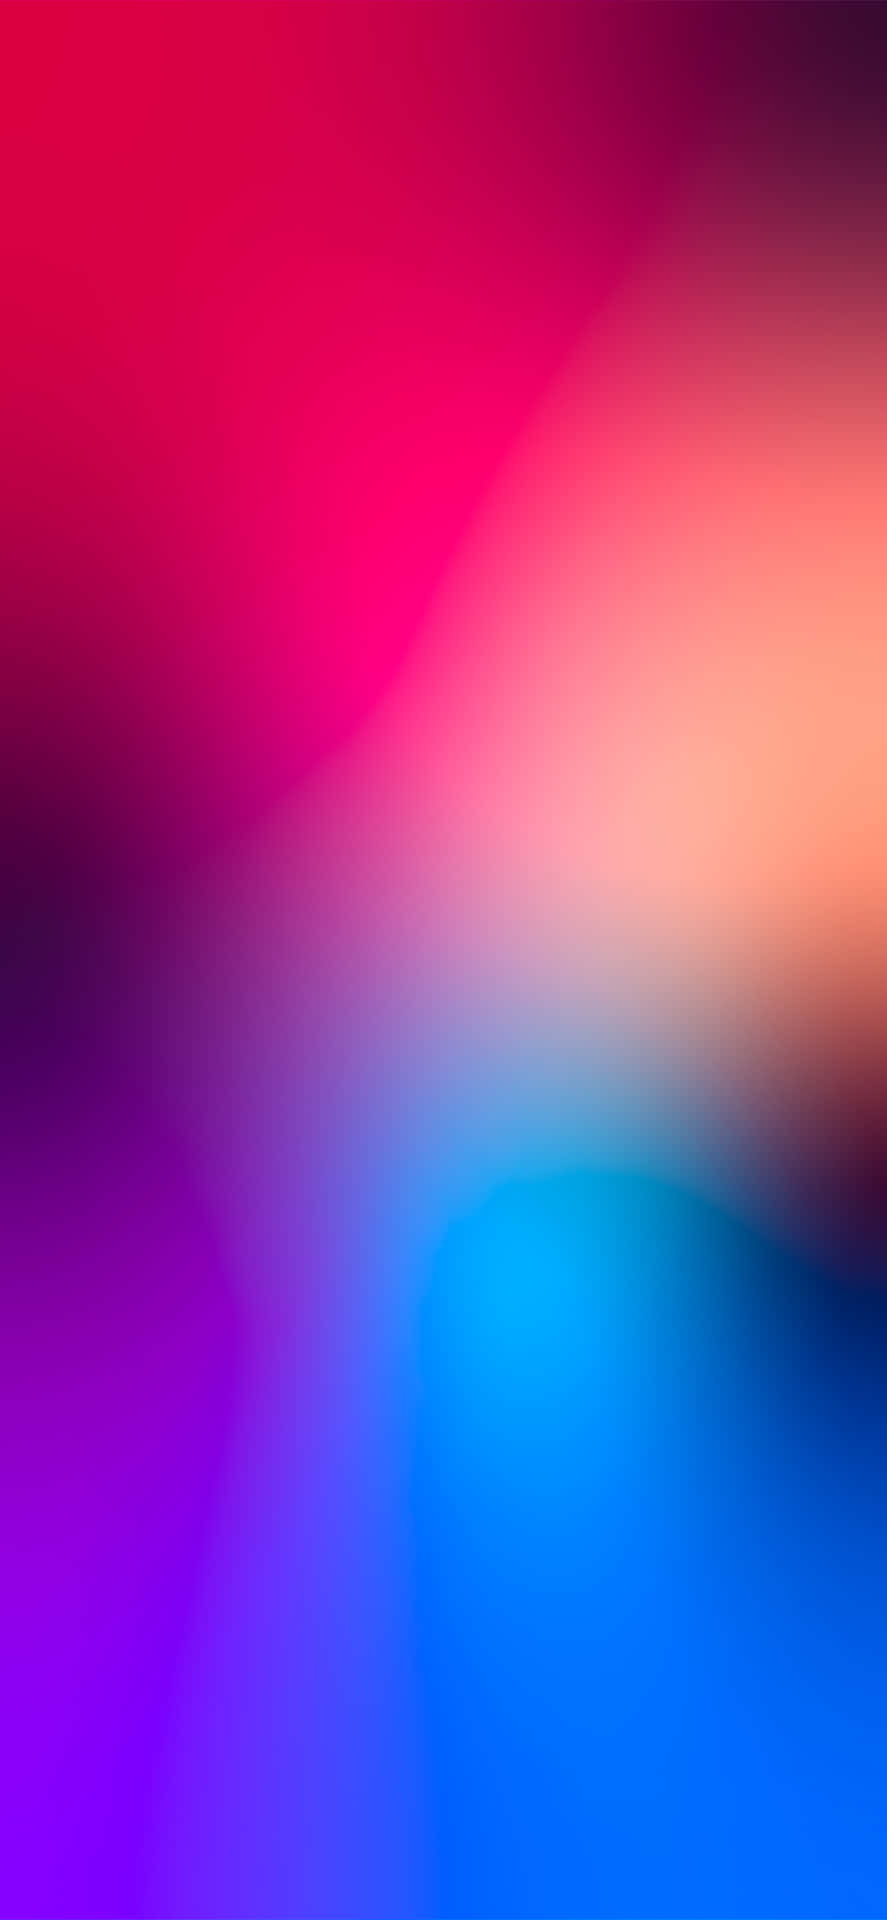 a blurred background with a pink, blue, and purple color